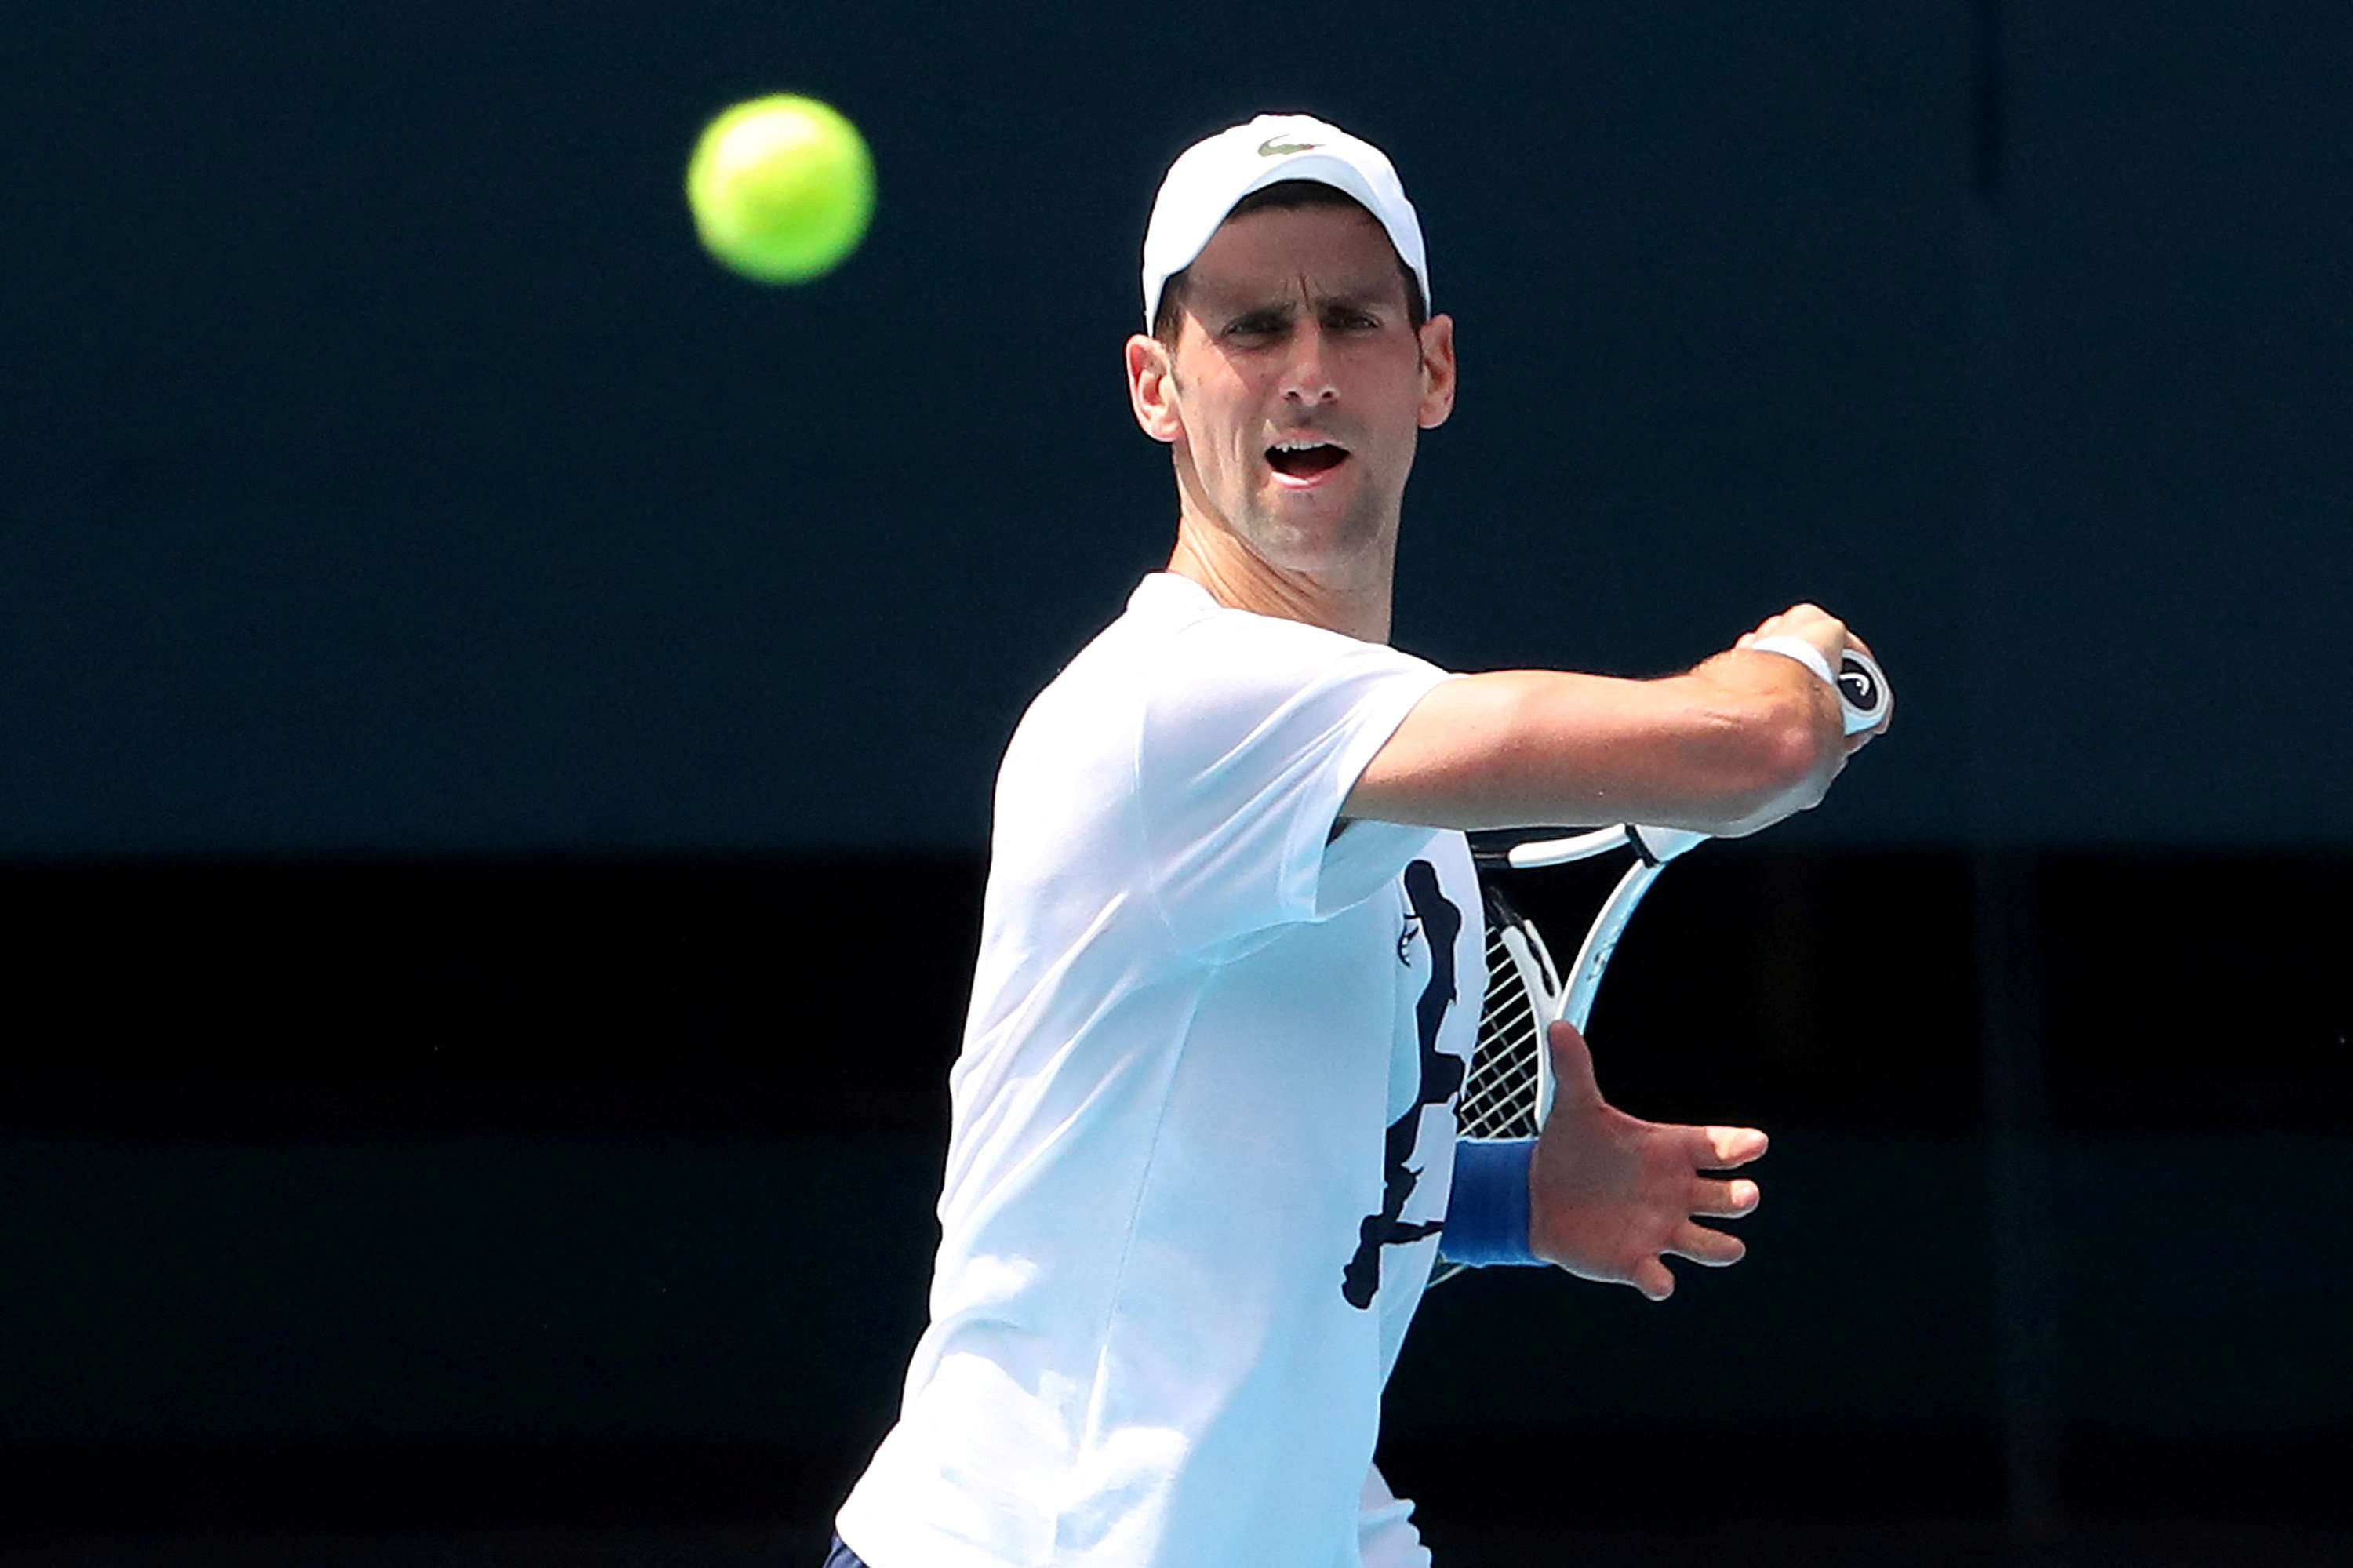 Novak Djokovichas been granted a visa and is expected to play in the Australian Open next month. Photo: Reuters